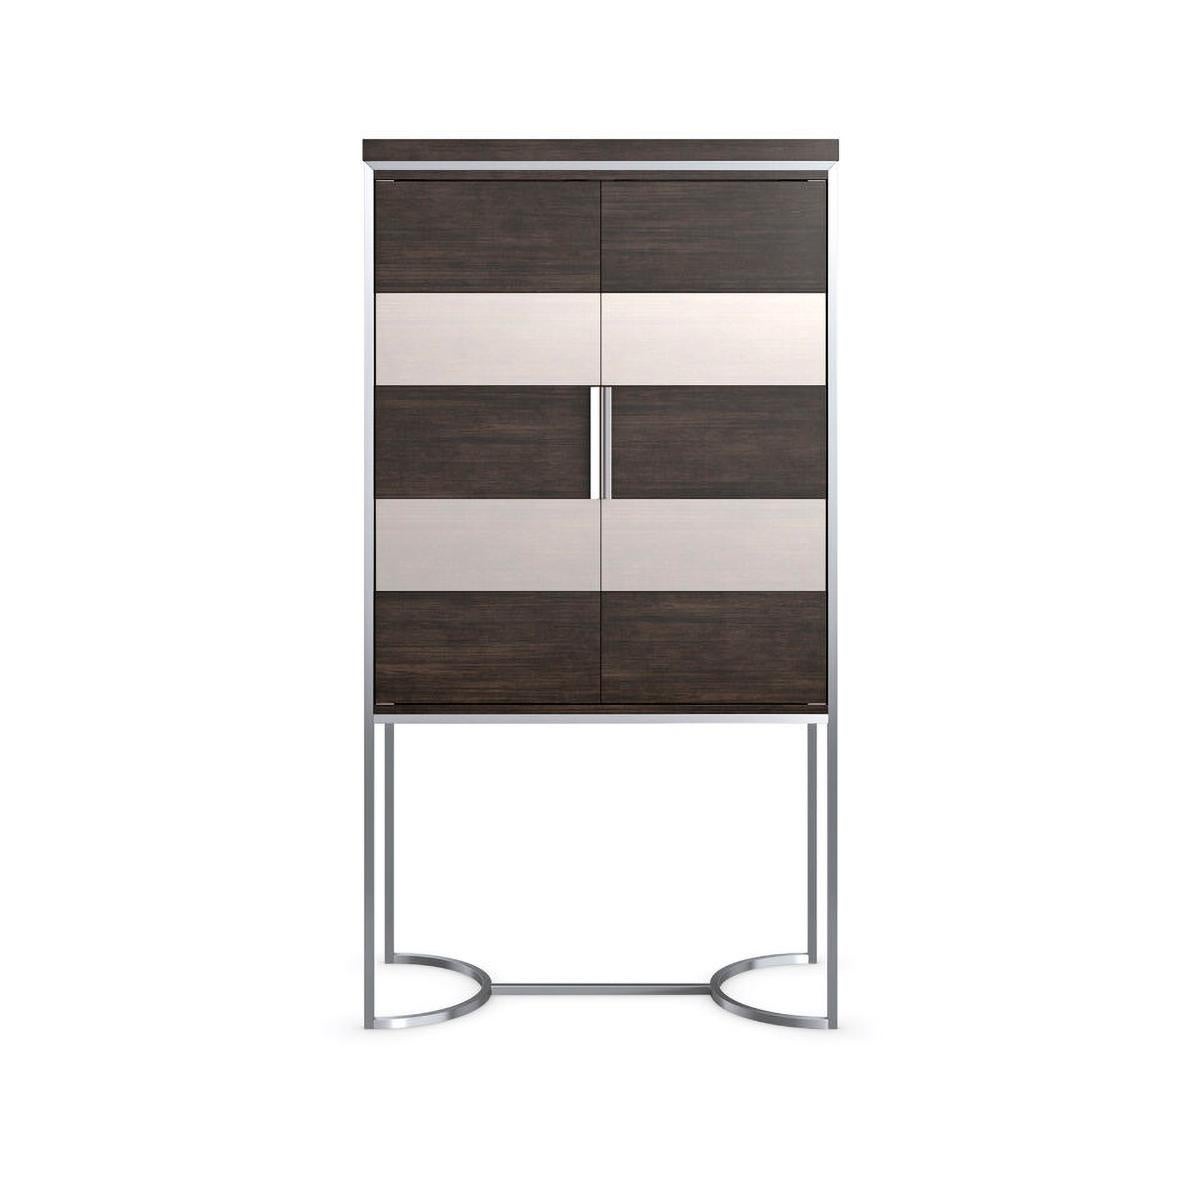 Smoked Modern bar cabinet, this architectural bar cabinet fuses form and function in an intriguing mix of materials and finishes. Its linear design adds height to a room, with a lavish amount of space for entertaining essentials. Features a mirrored